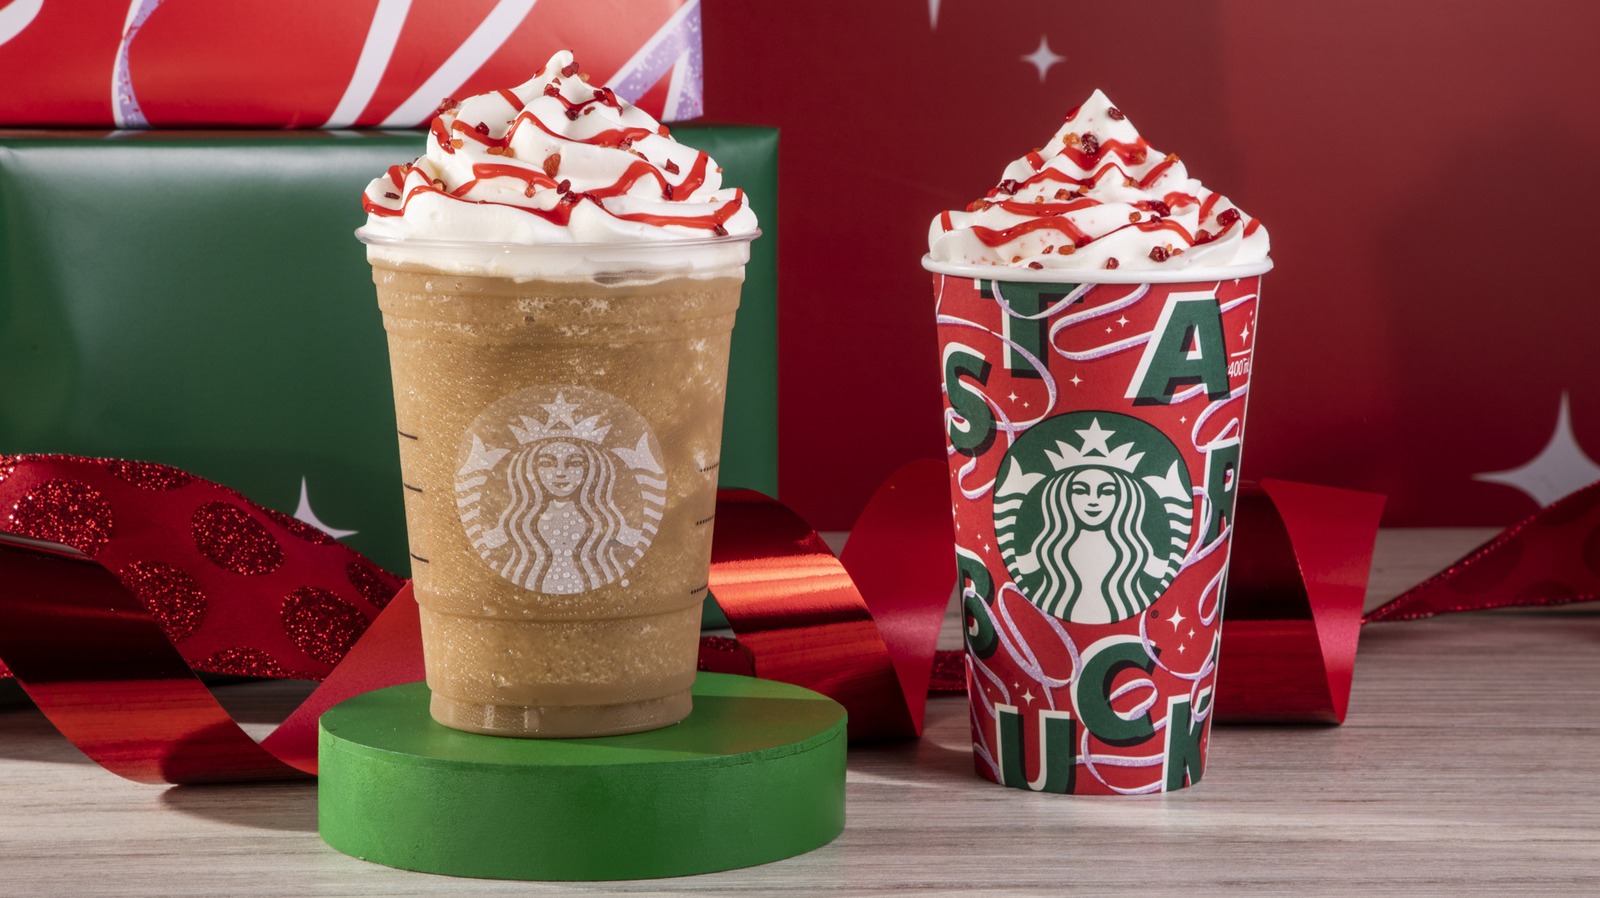 https://www.mashed.com/img/gallery/starbucks-holiday-drinks-you-wont-find-in-the-us/l-intro-1700592300.jpg